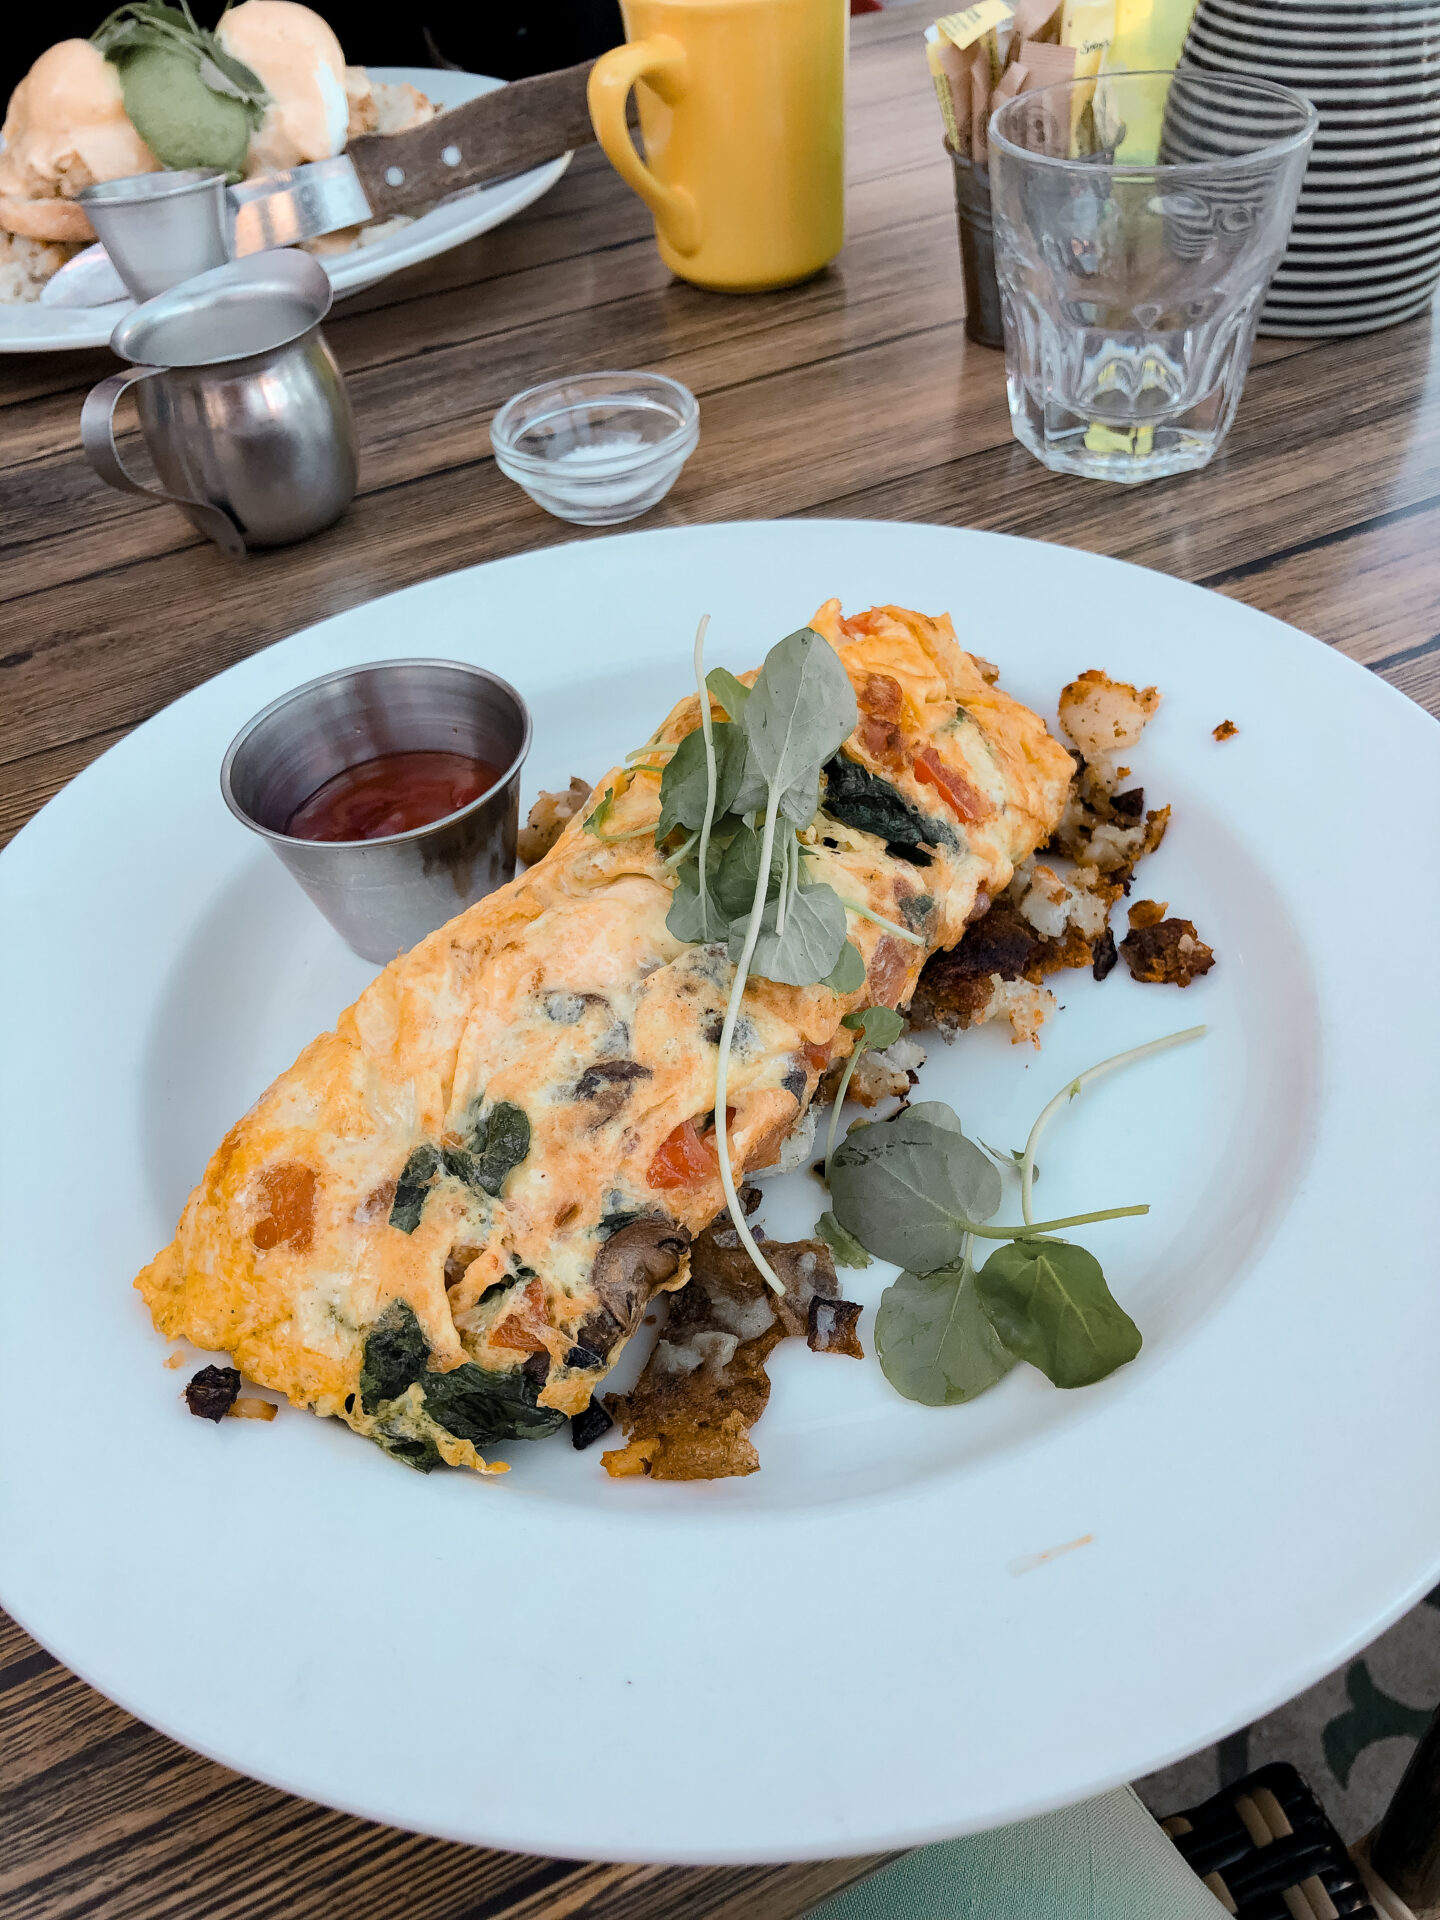 How to spend one day in San Diego itinerary - Palm Trees and Pellegrino San Diego and California travel tips - Cody's La Jolla restaurant omelette brunch